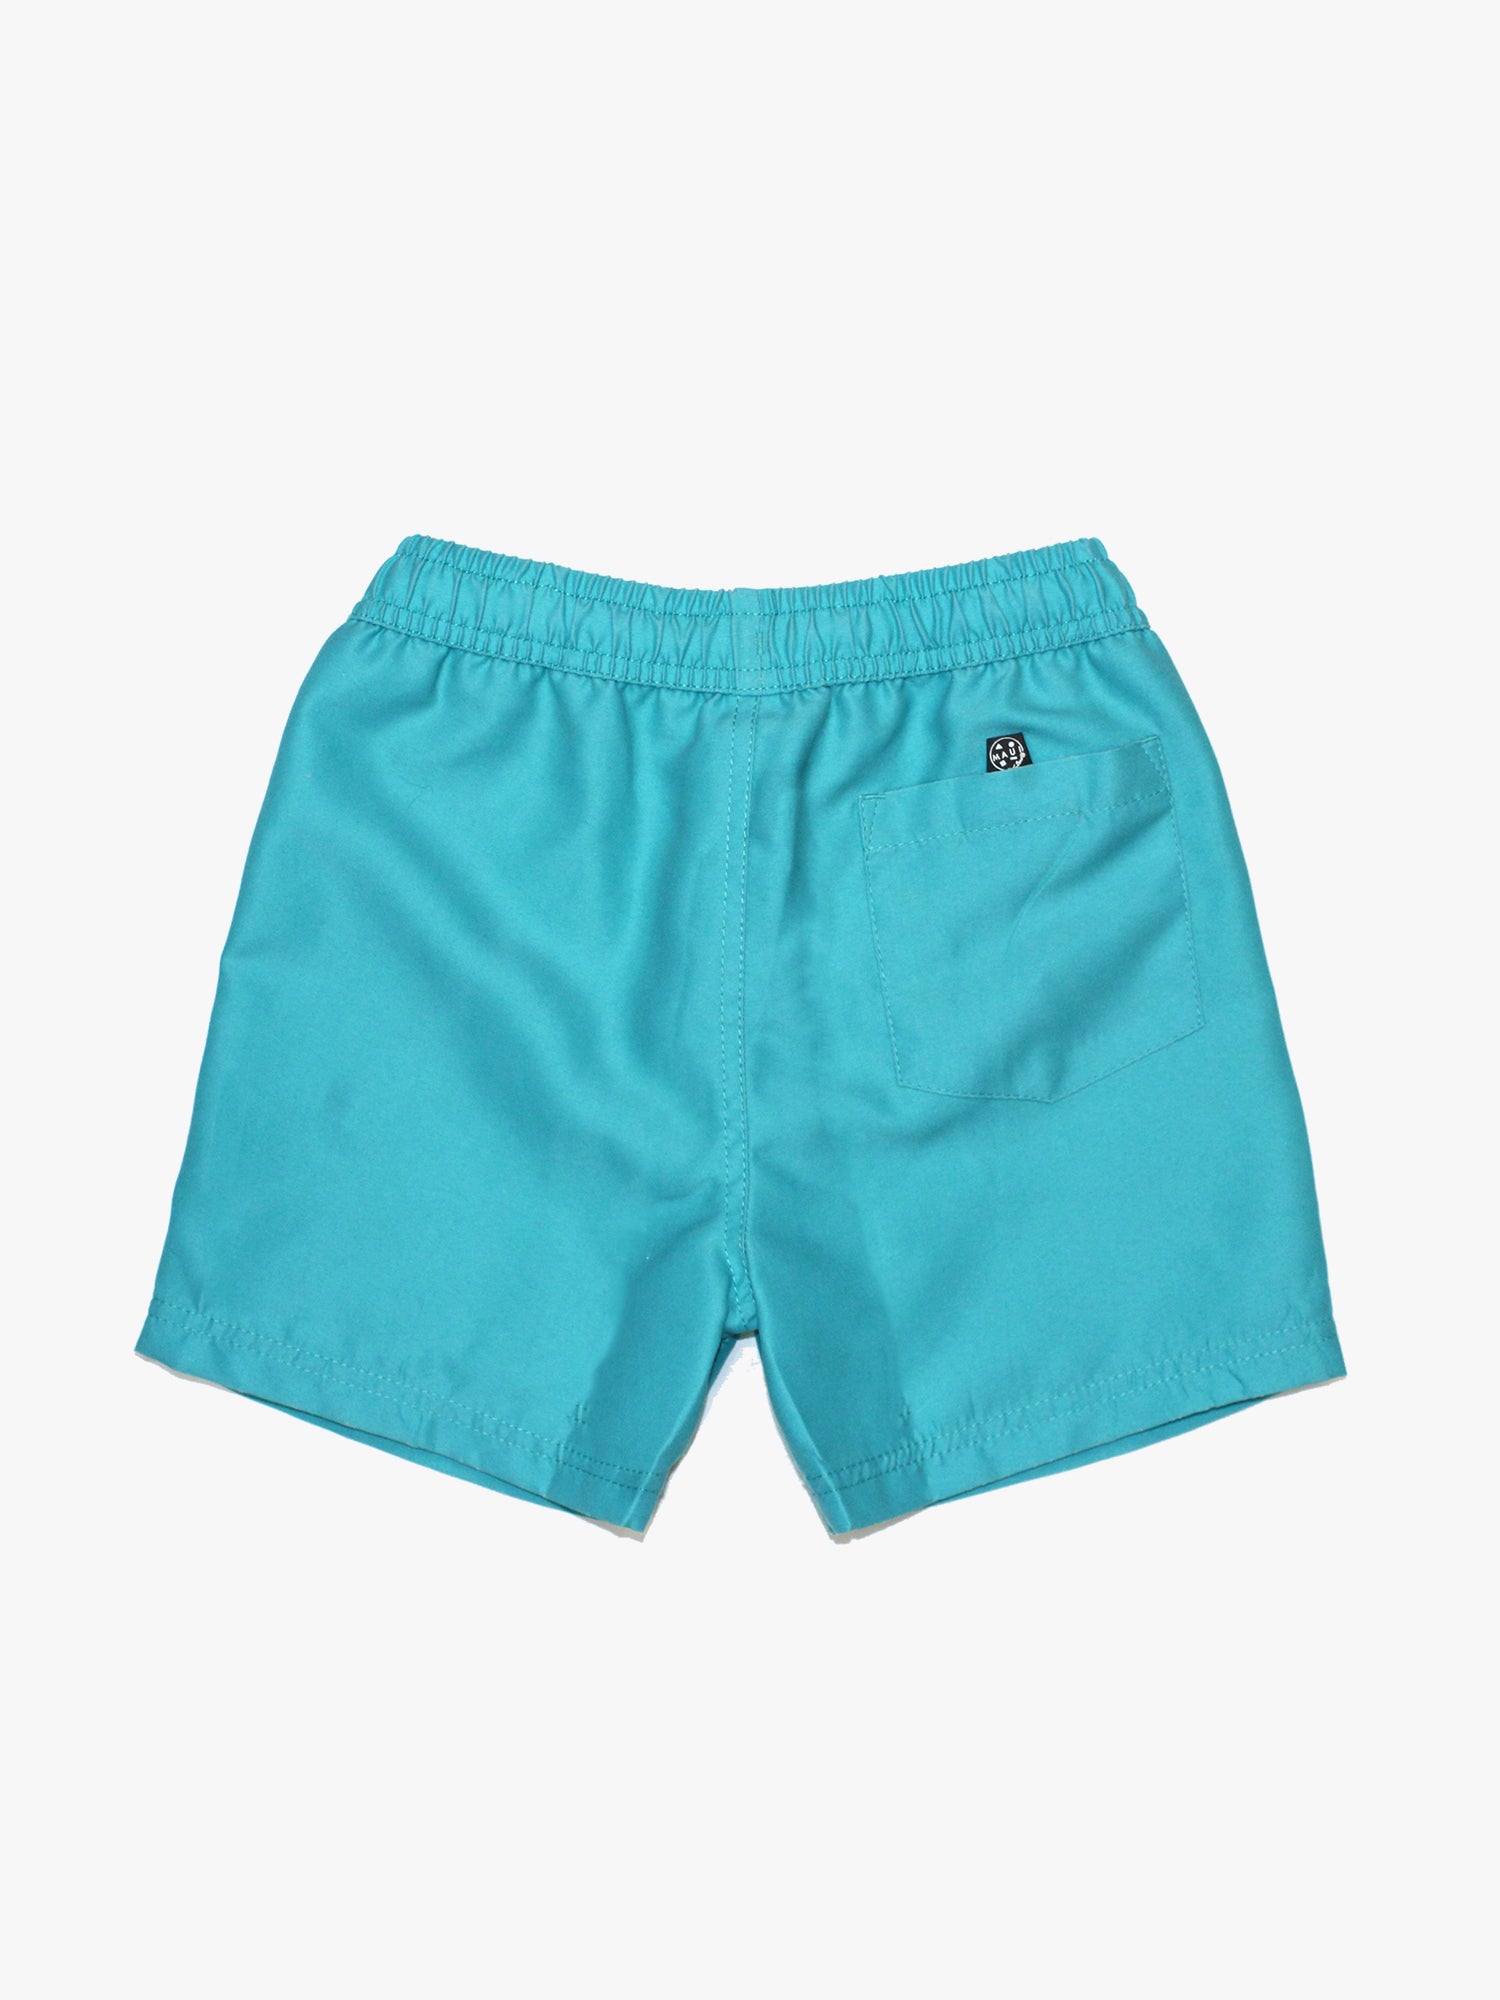 Boys Fifty Fifty Pool Shorts